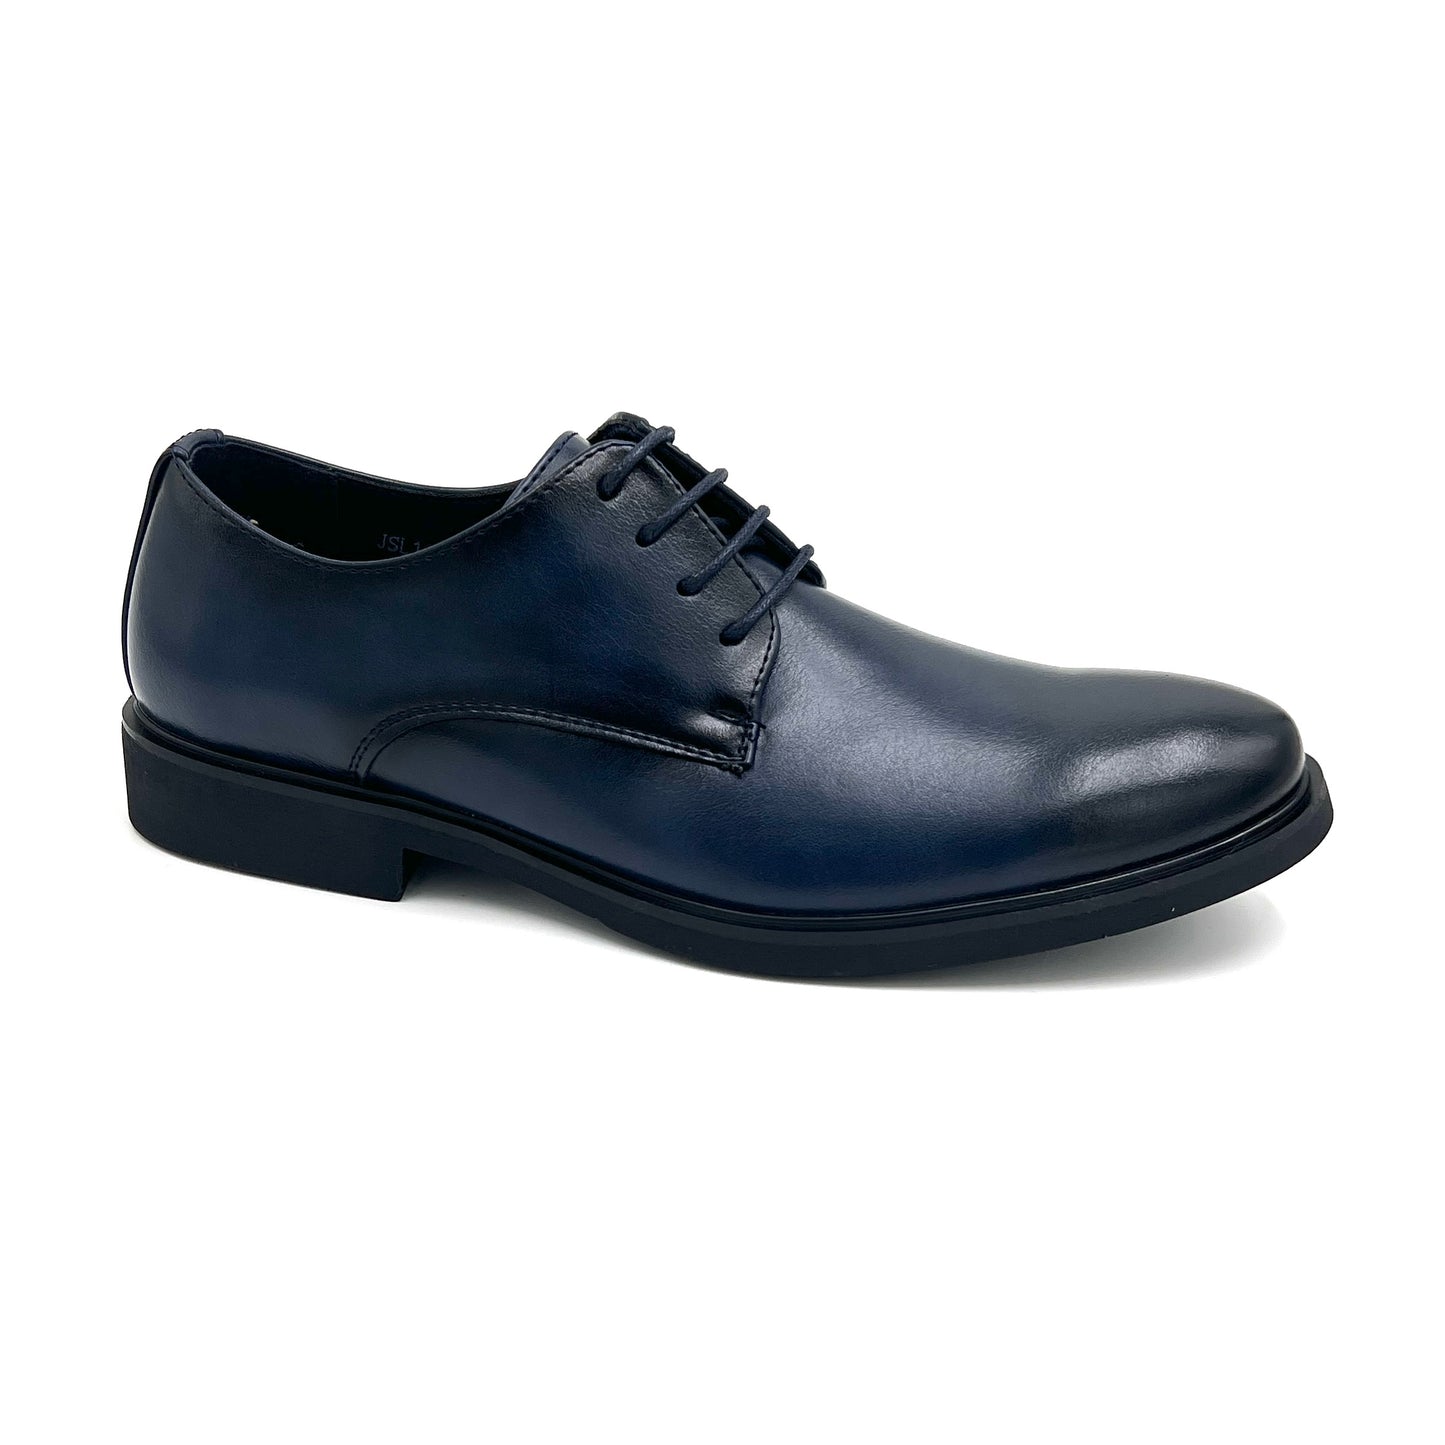 2H #110-100 Navy Classic Shoes